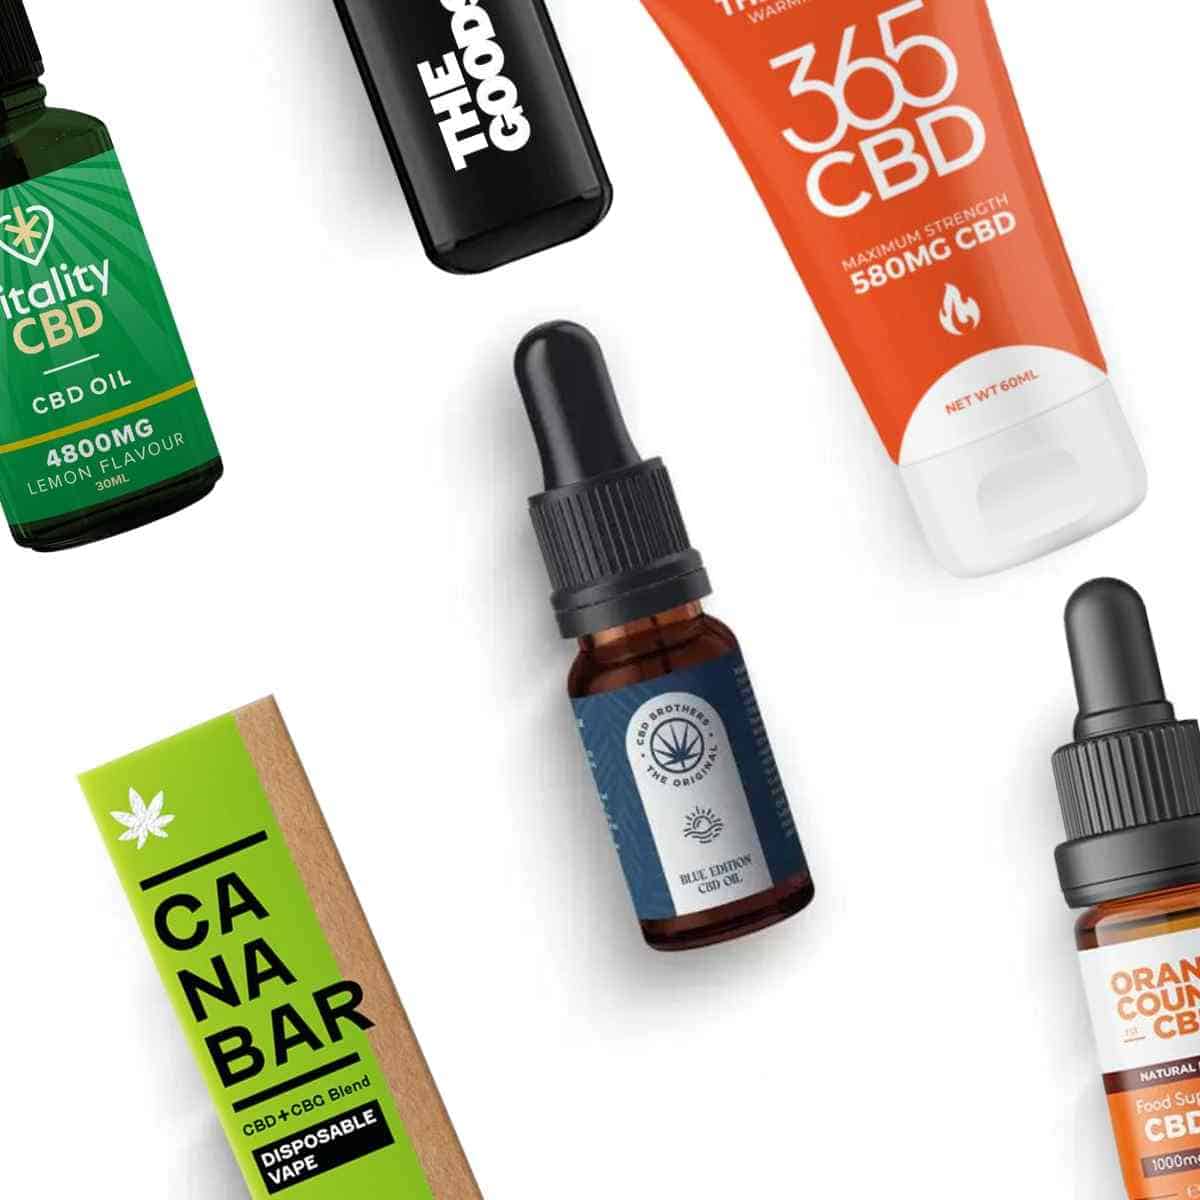 Hemptations CBD Shop products lined up with white background